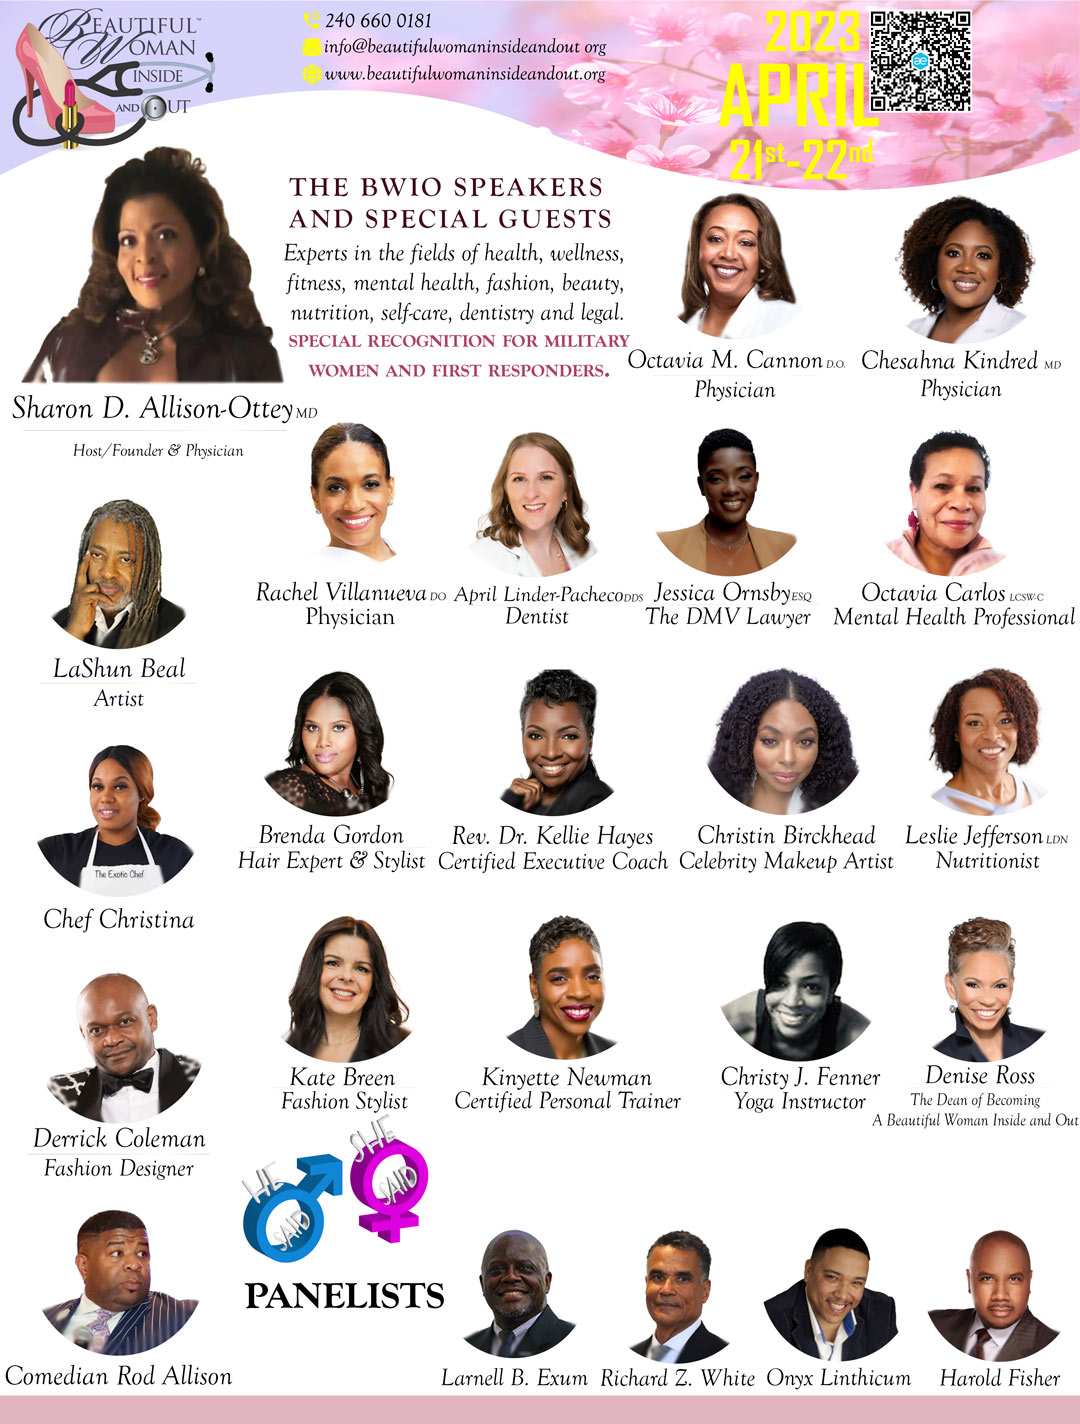 Beautiful Woman Inside and Out Conference Speakers and Special Guests